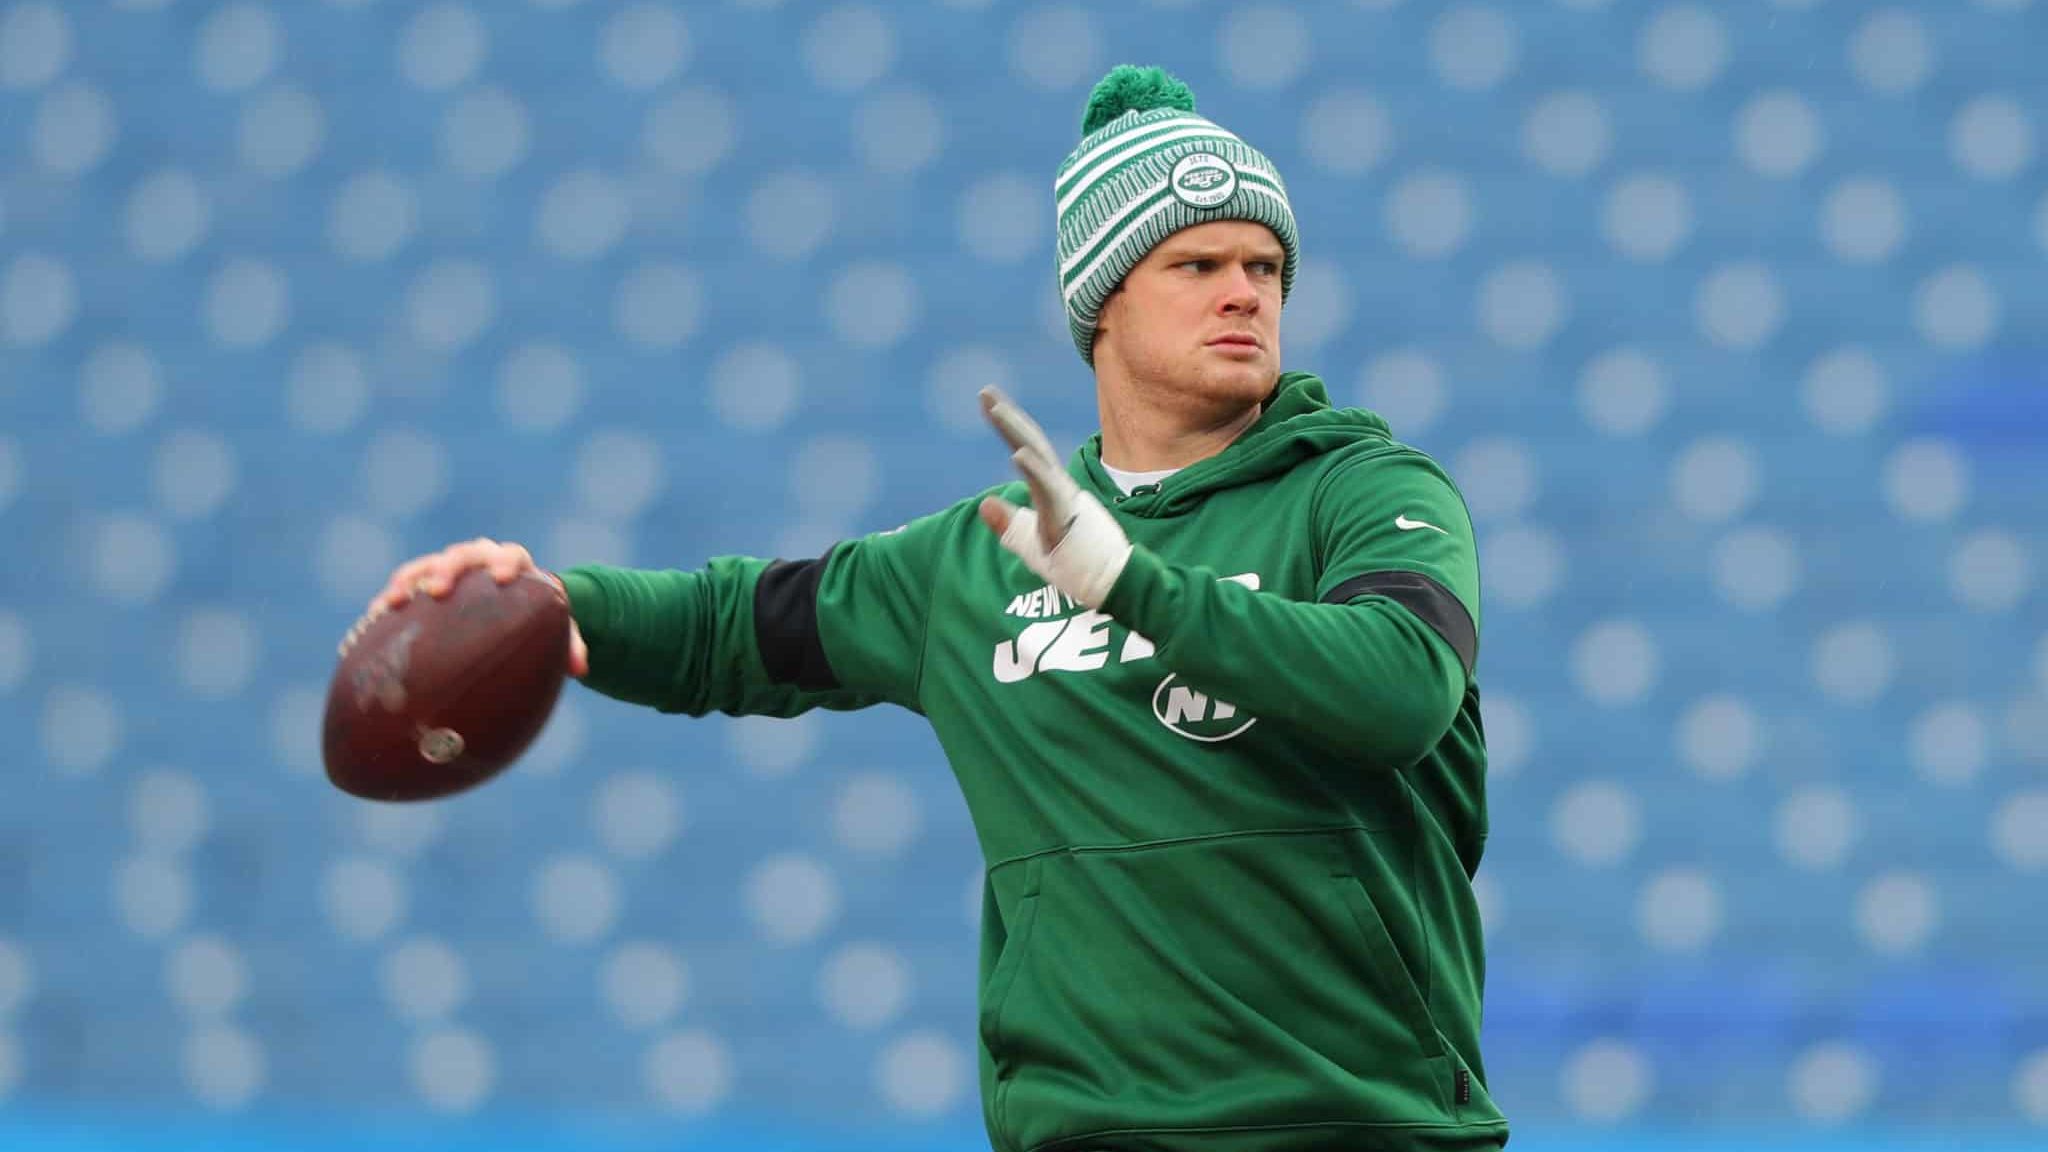 ORCHARD PARK, NY - DECEMBER 29: Sam Darnold #14 of the New York Jets throws a pass before a game against the Buffalo Bills at New Era Field on December 29, 2019 in Orchard Park, New York.